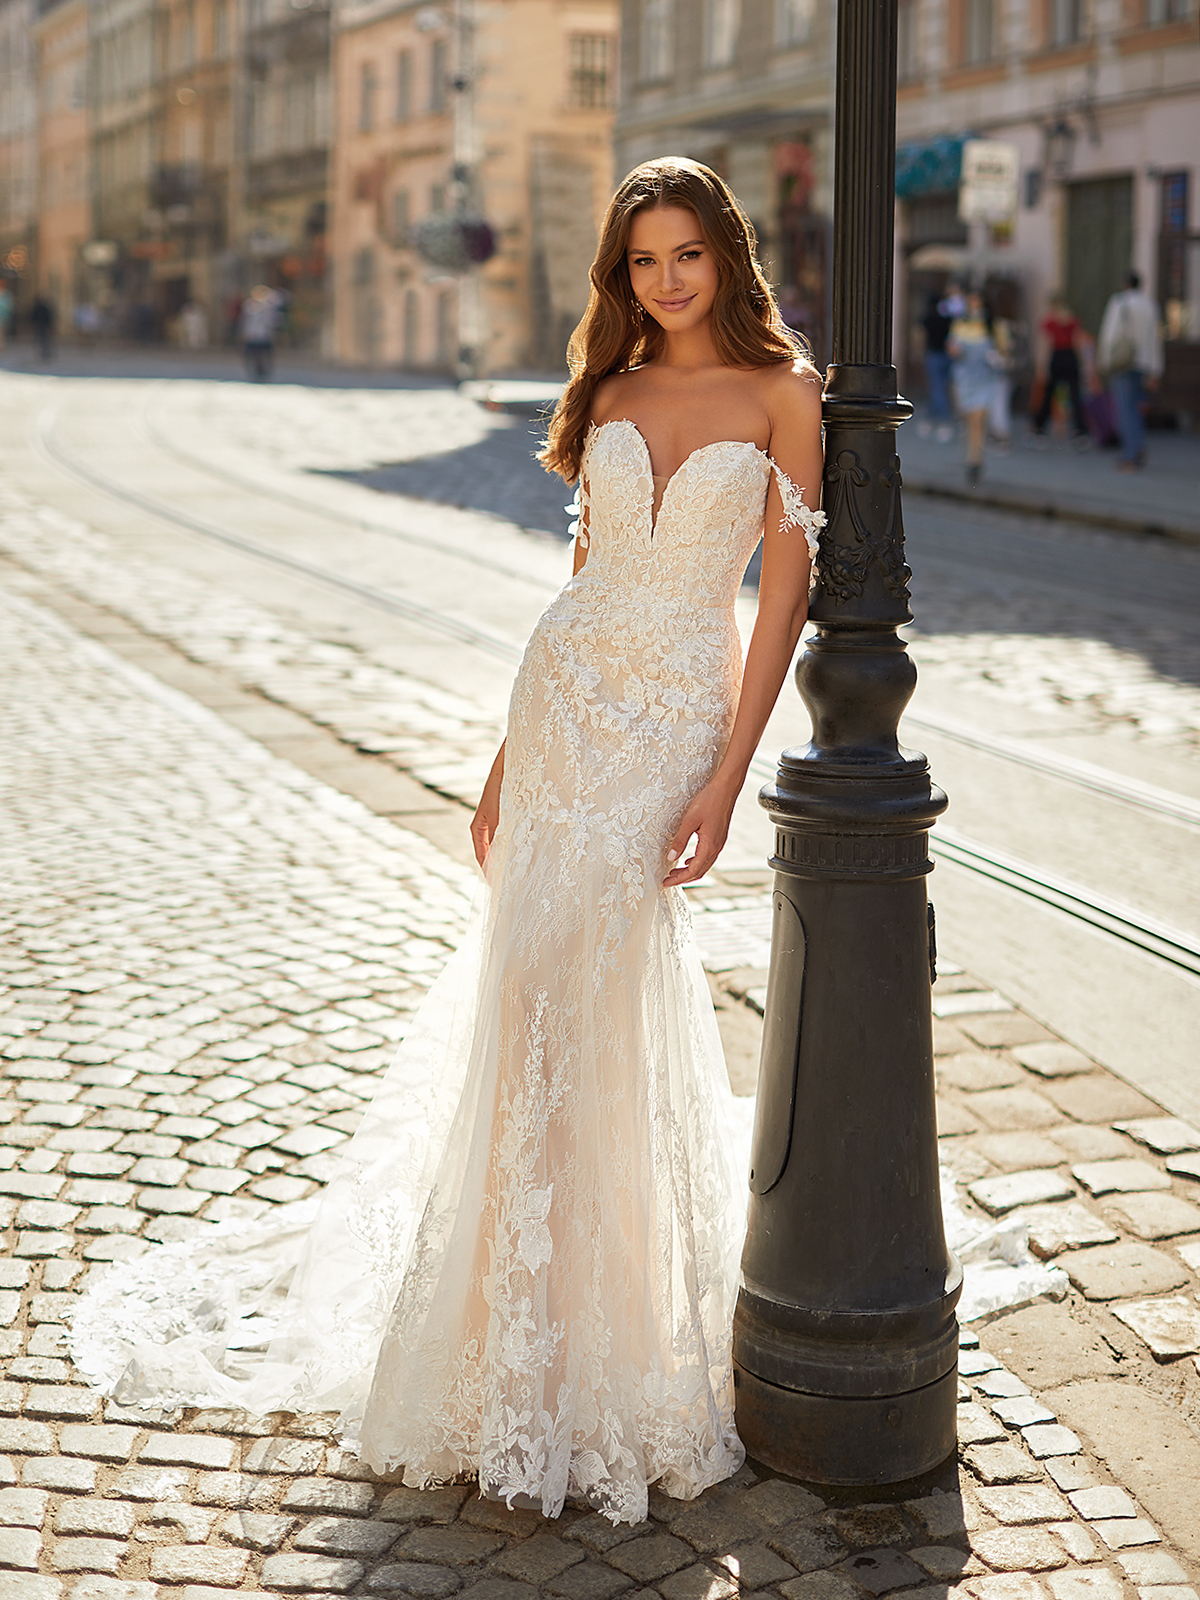 Bride leaning against an outdoor lamp post in a white wedding dress with off-the-shoulder swag sleeves